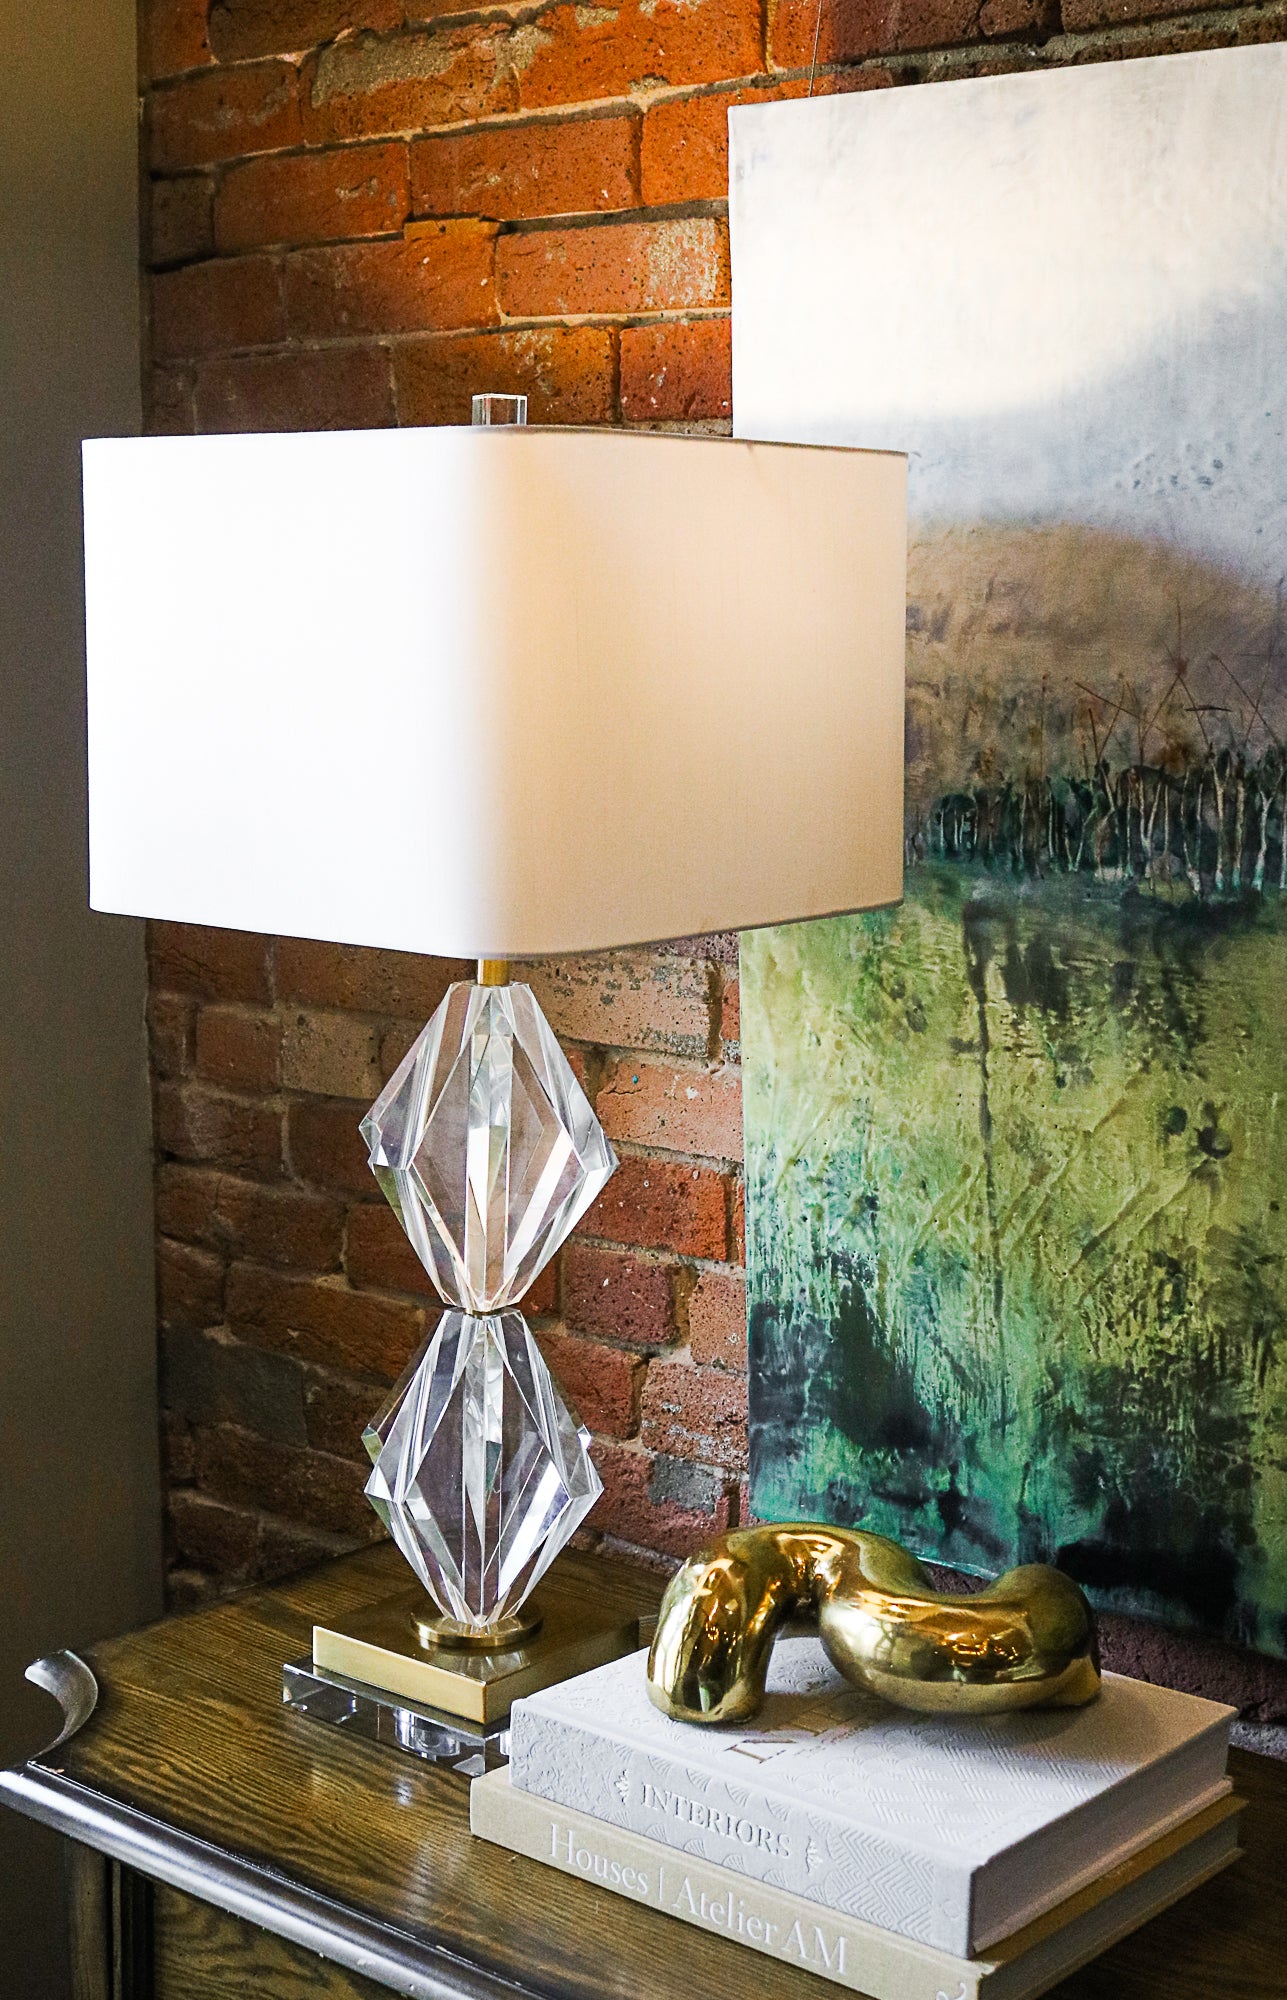 Euclid Table Lamp - Couture Lamps